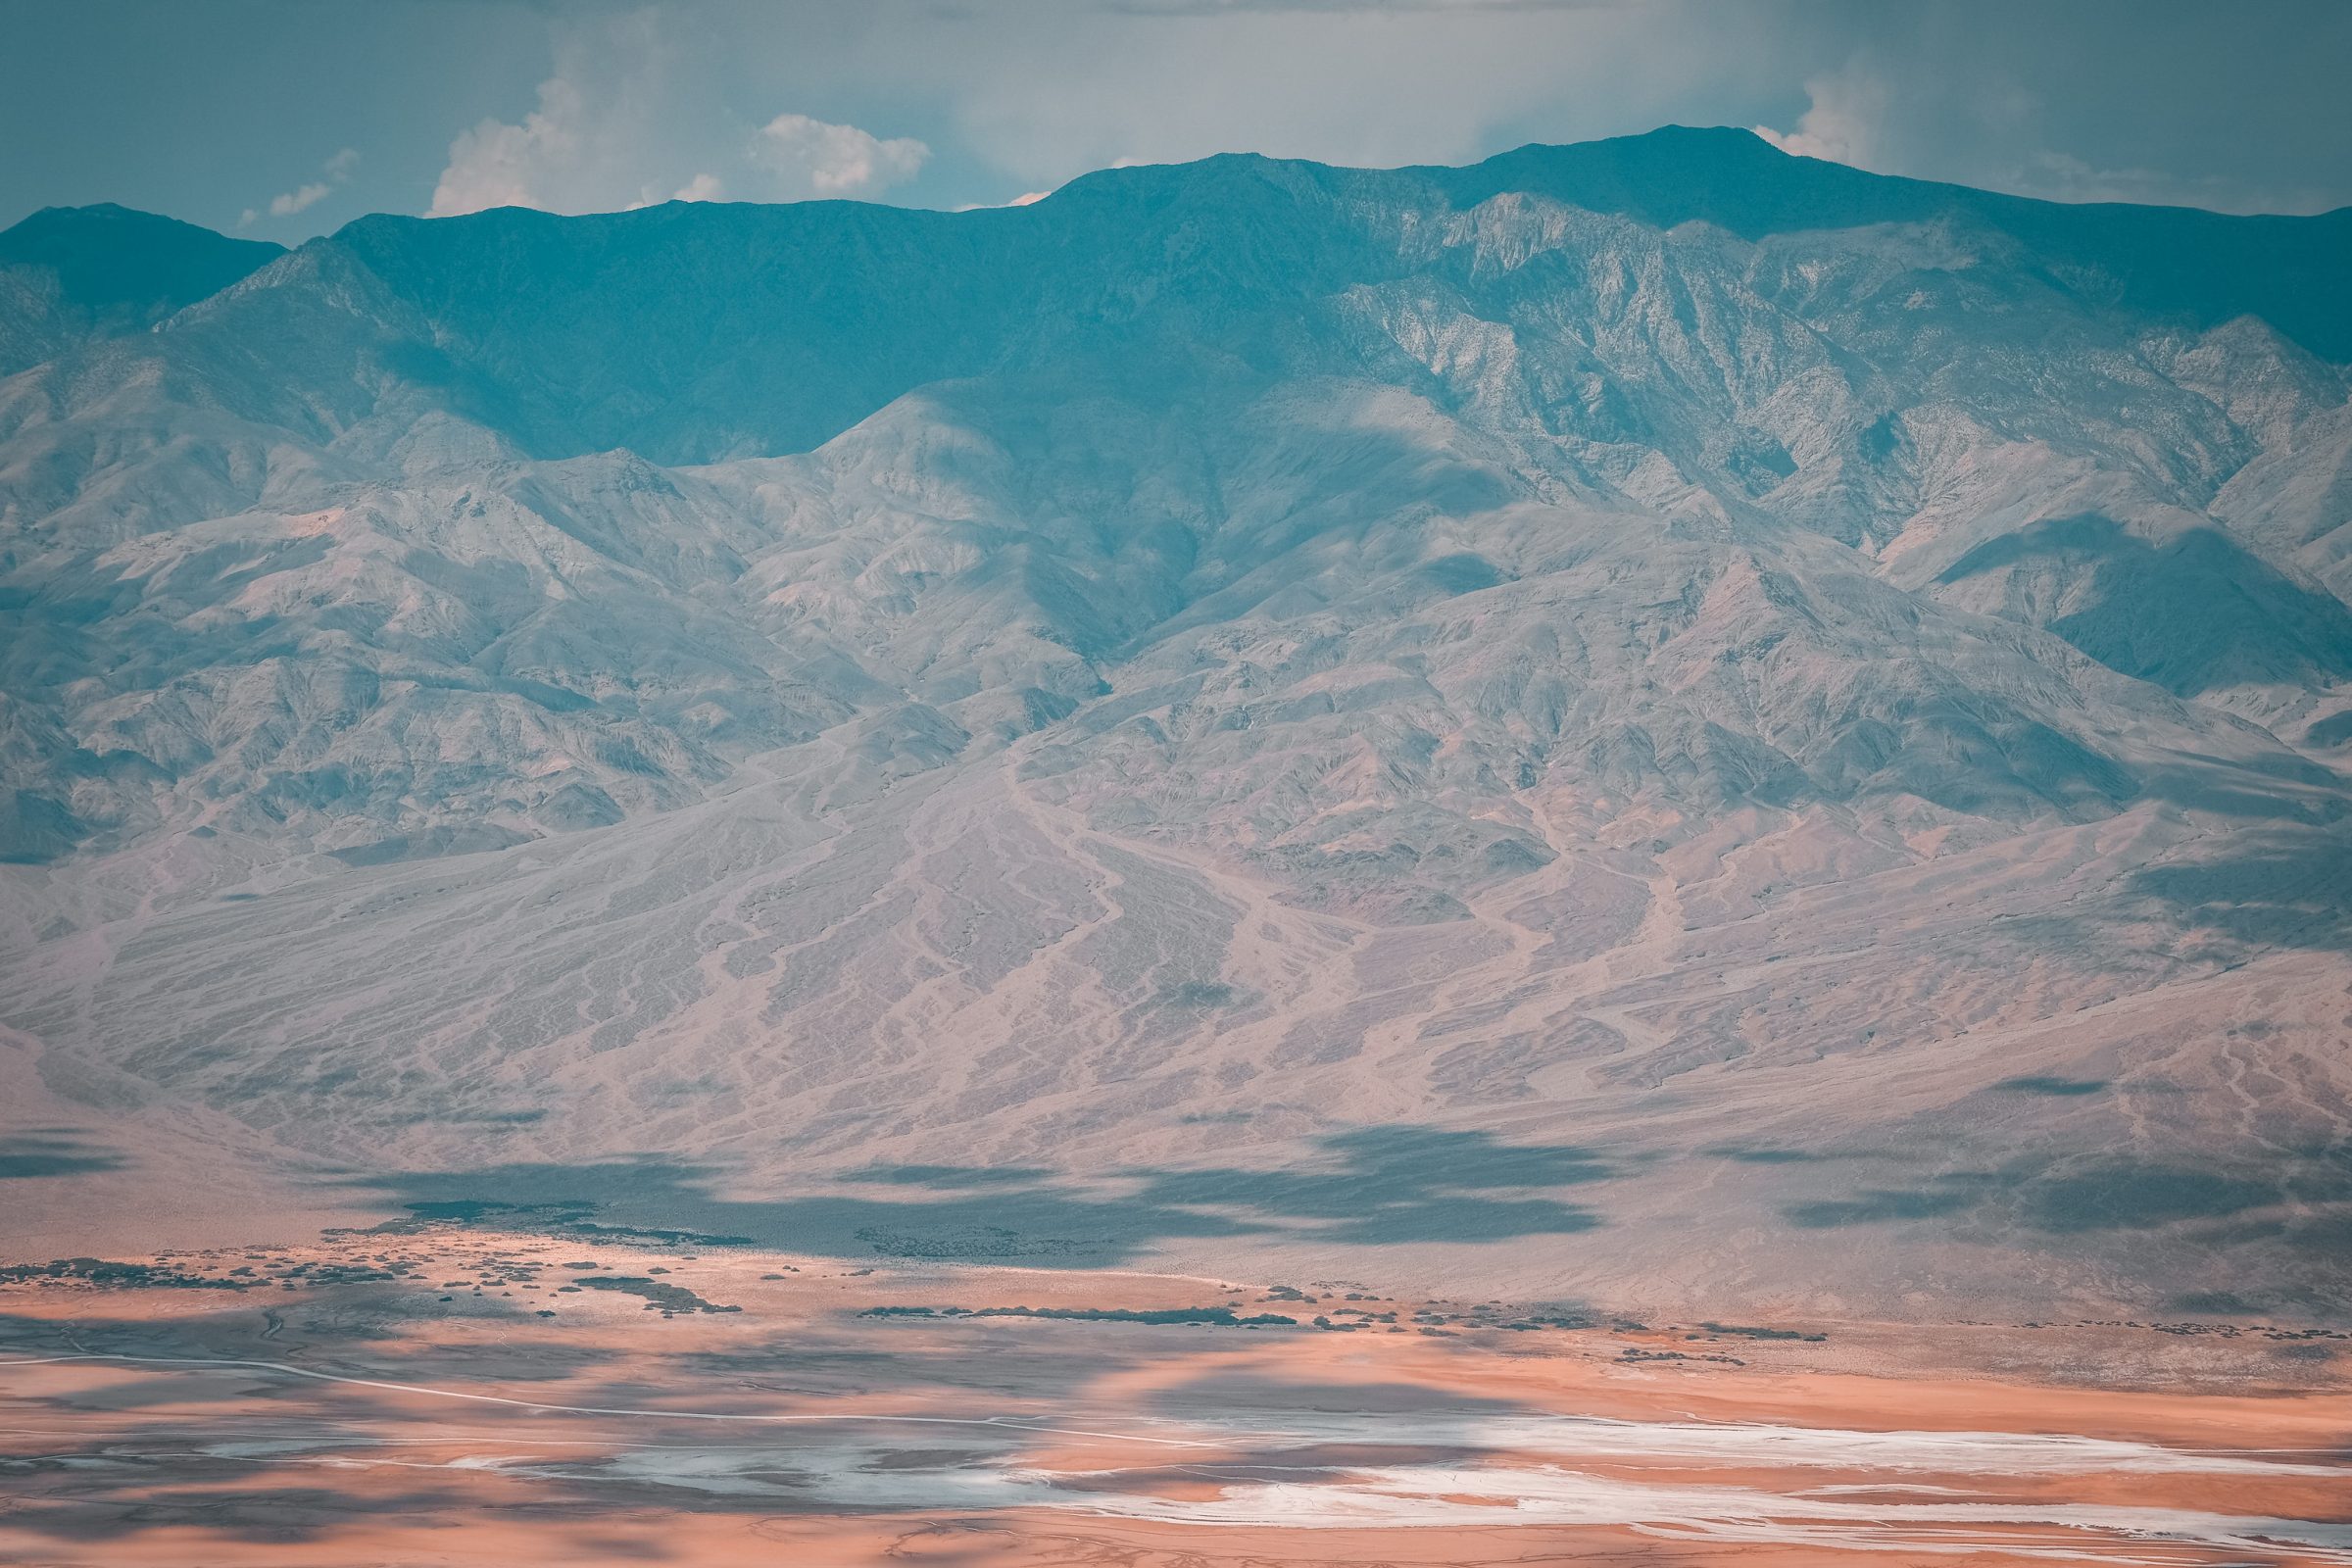 TelescopePeak | Tips for Death Valley National Park